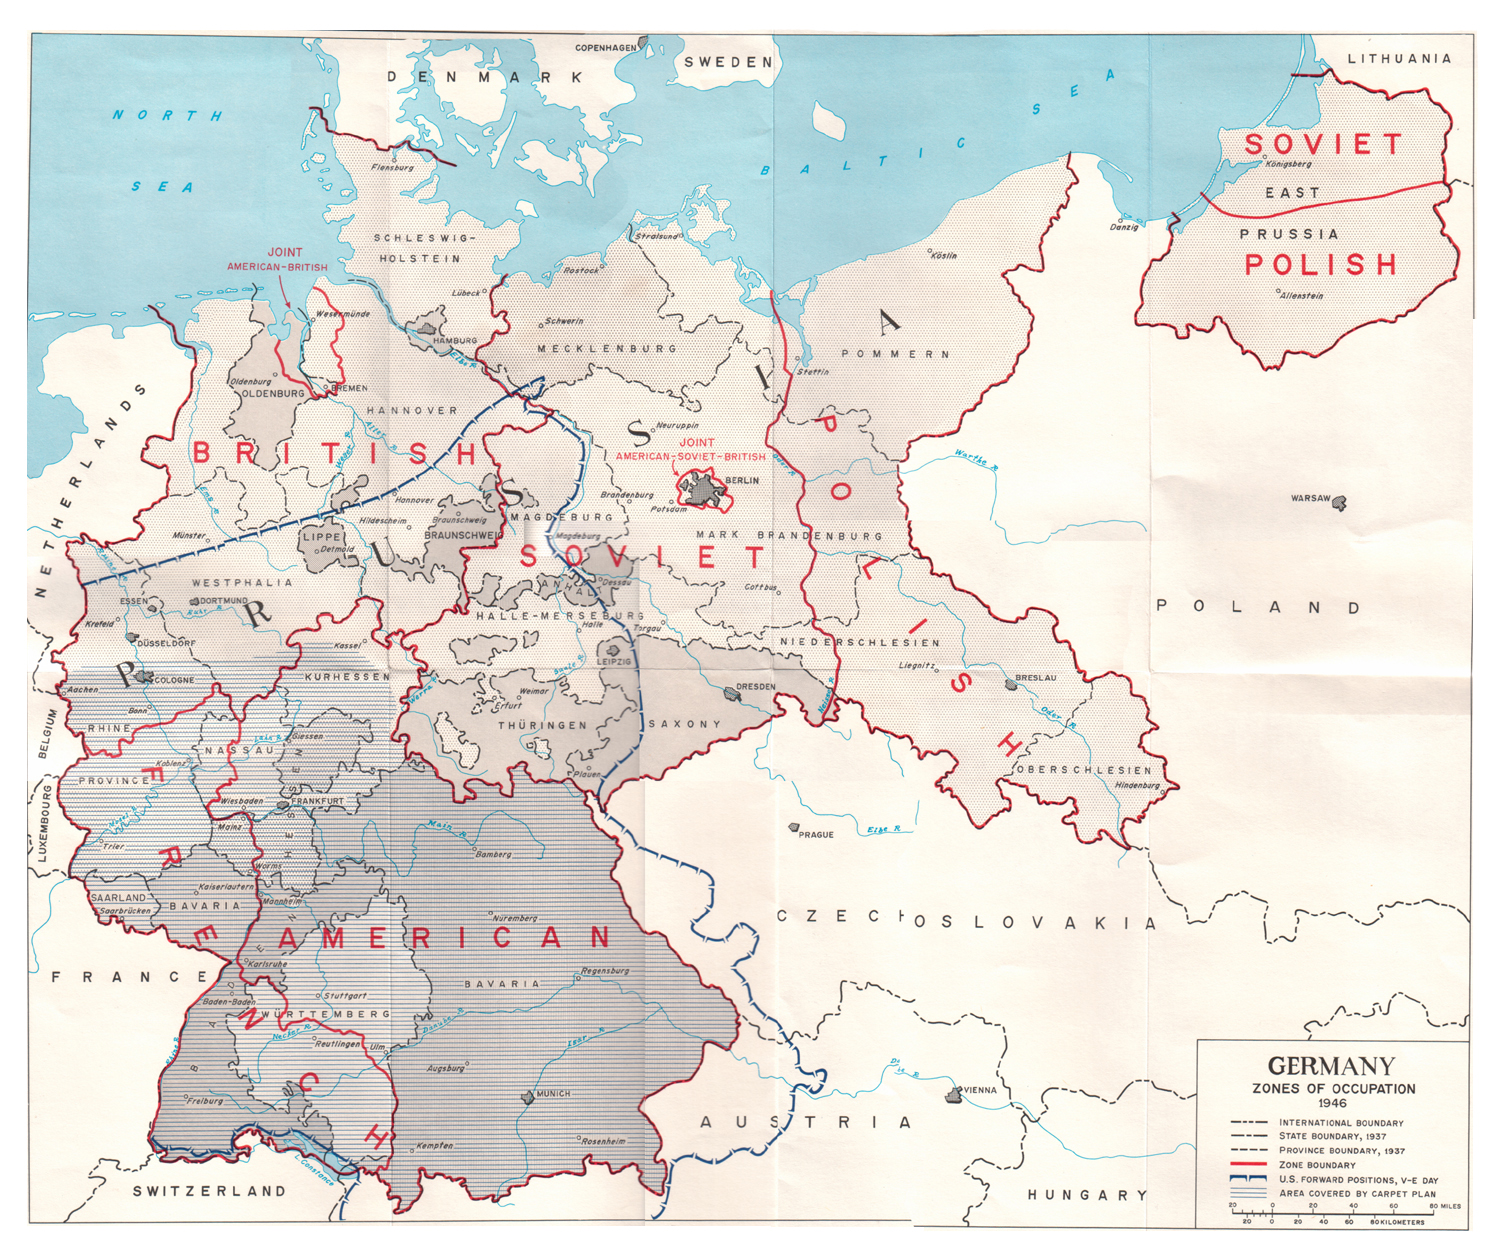 Germany, Zones of Occupation, 1946